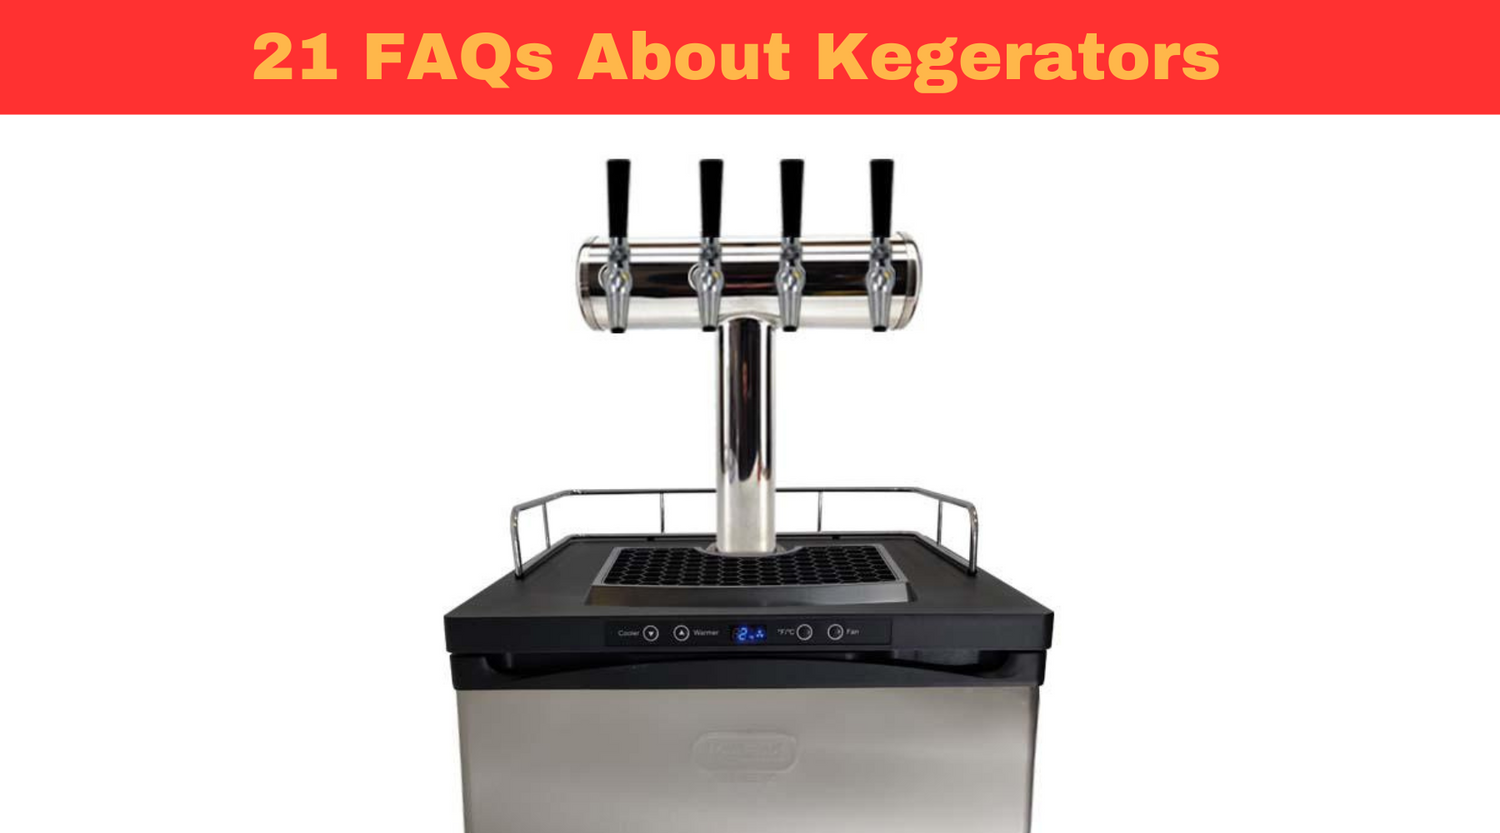 an image of a kegerator with beer taps and text: 21 FAQs about kegerators